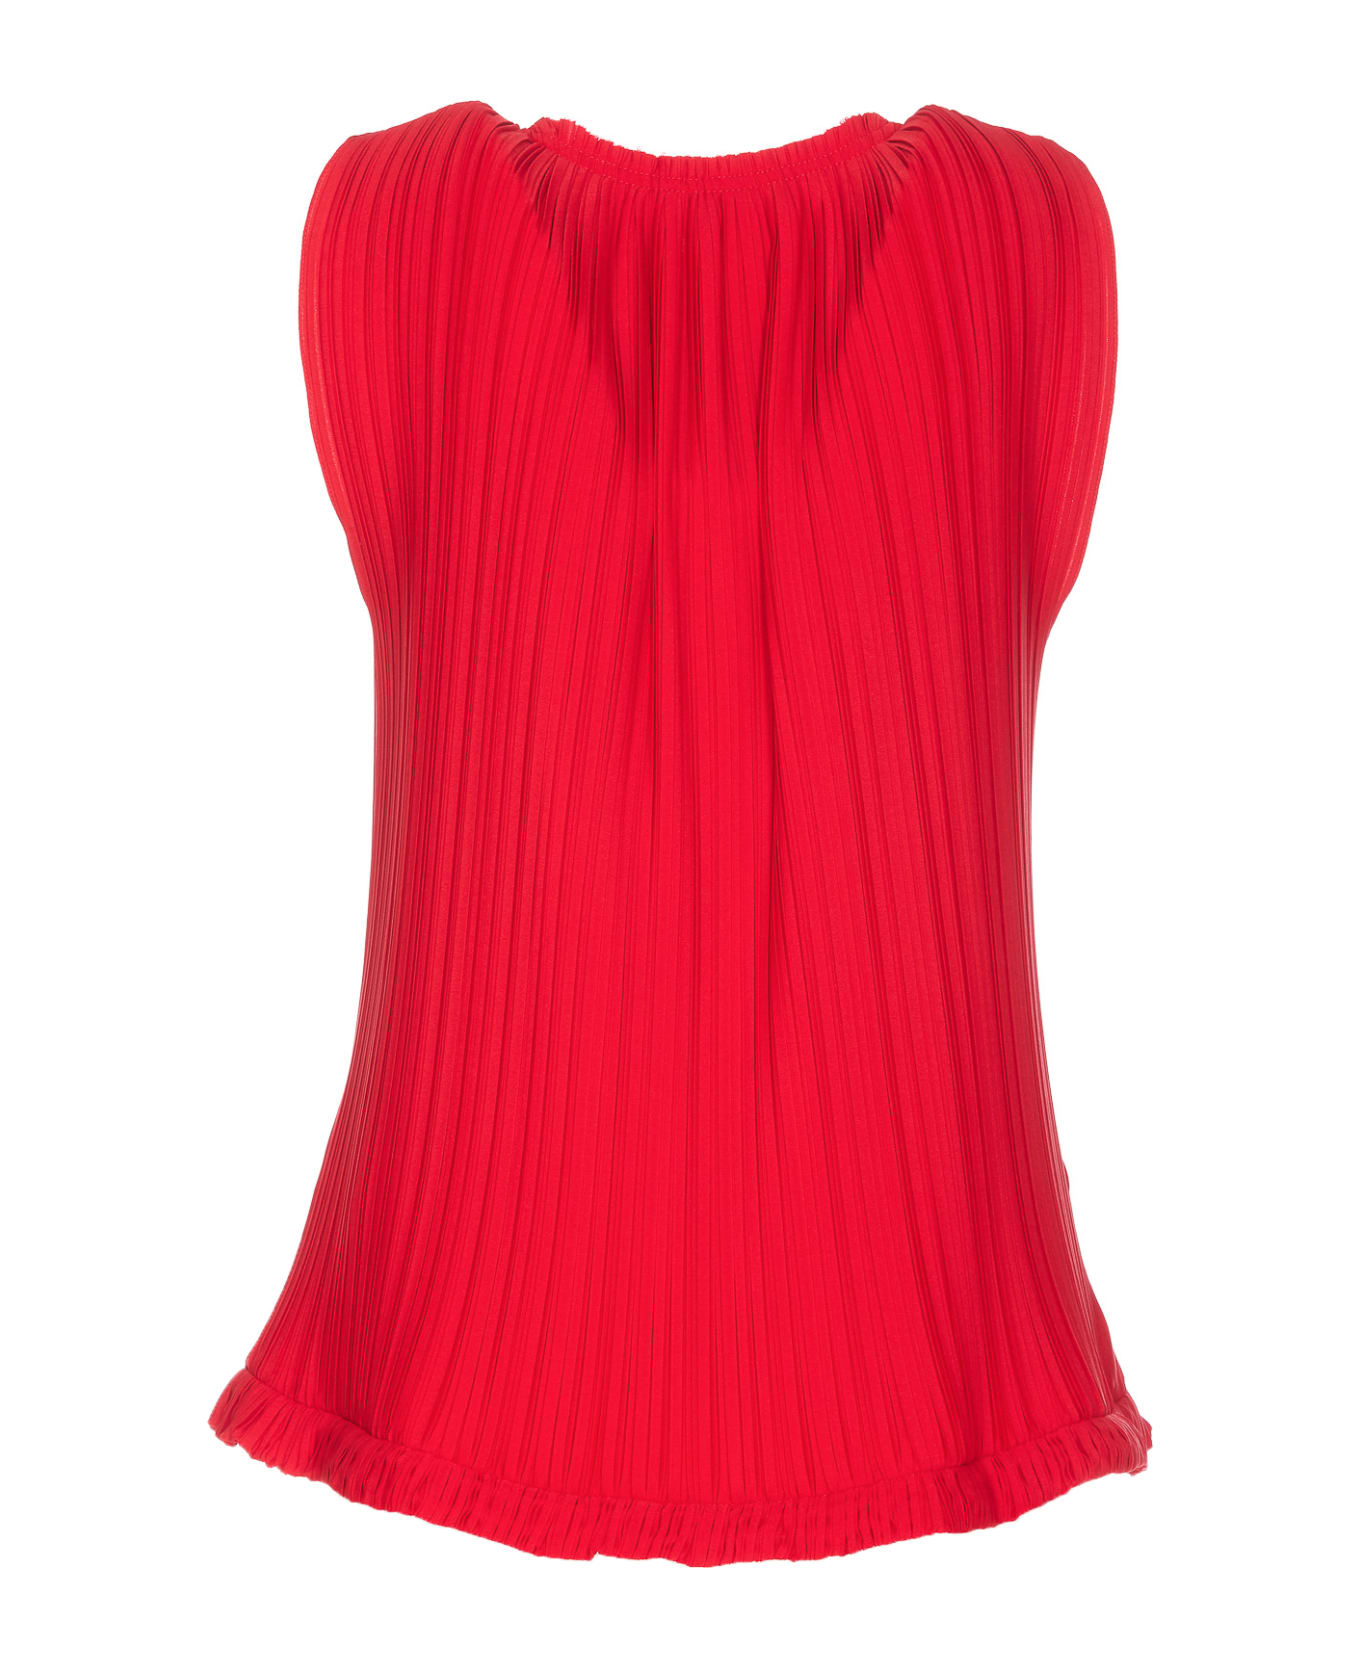 Lanvin Pleated Top - Red